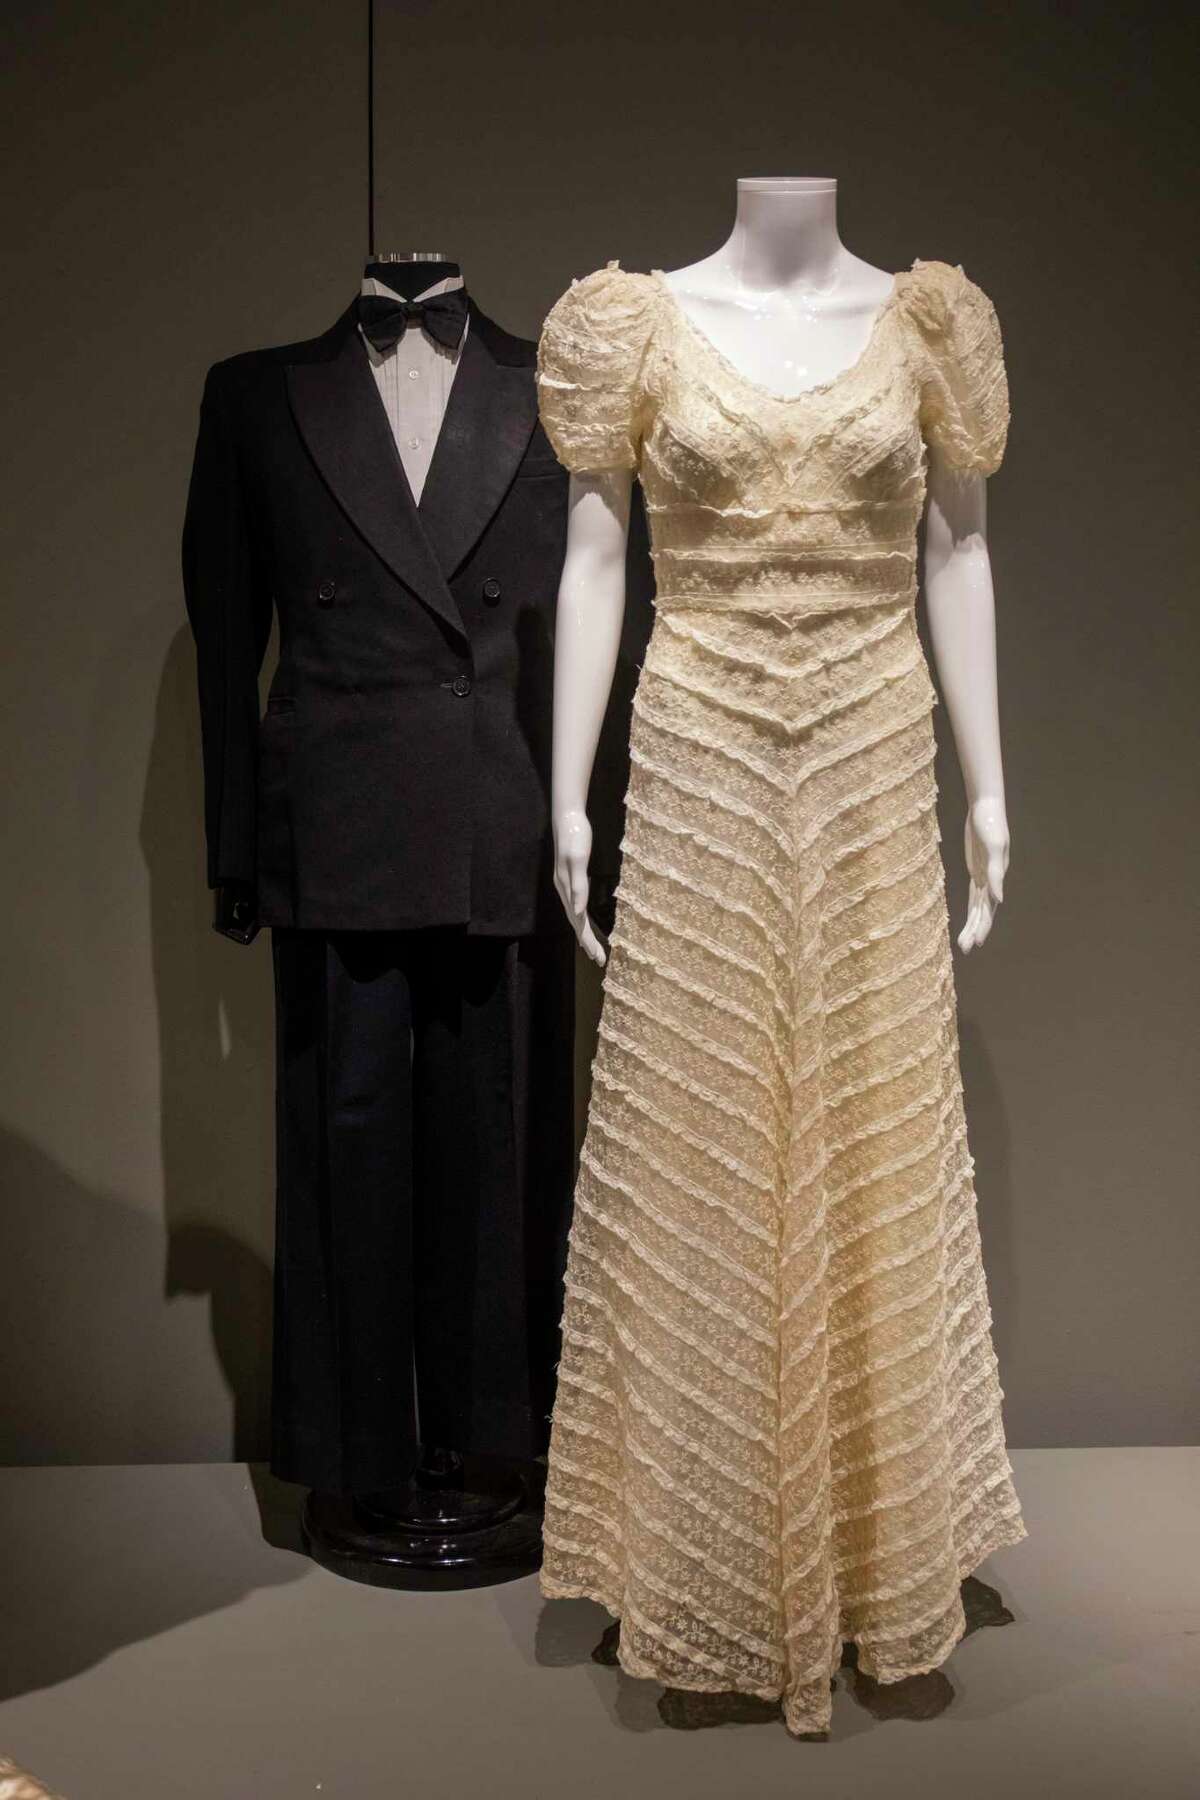 ‘Betrothed: 250 Years of Wedding Fashion’ exhibit as seen Tuesday, Dec. 1, 2020 at the Ellen Noel Art Museum. Jacy Lewis/Reporter-Telegram